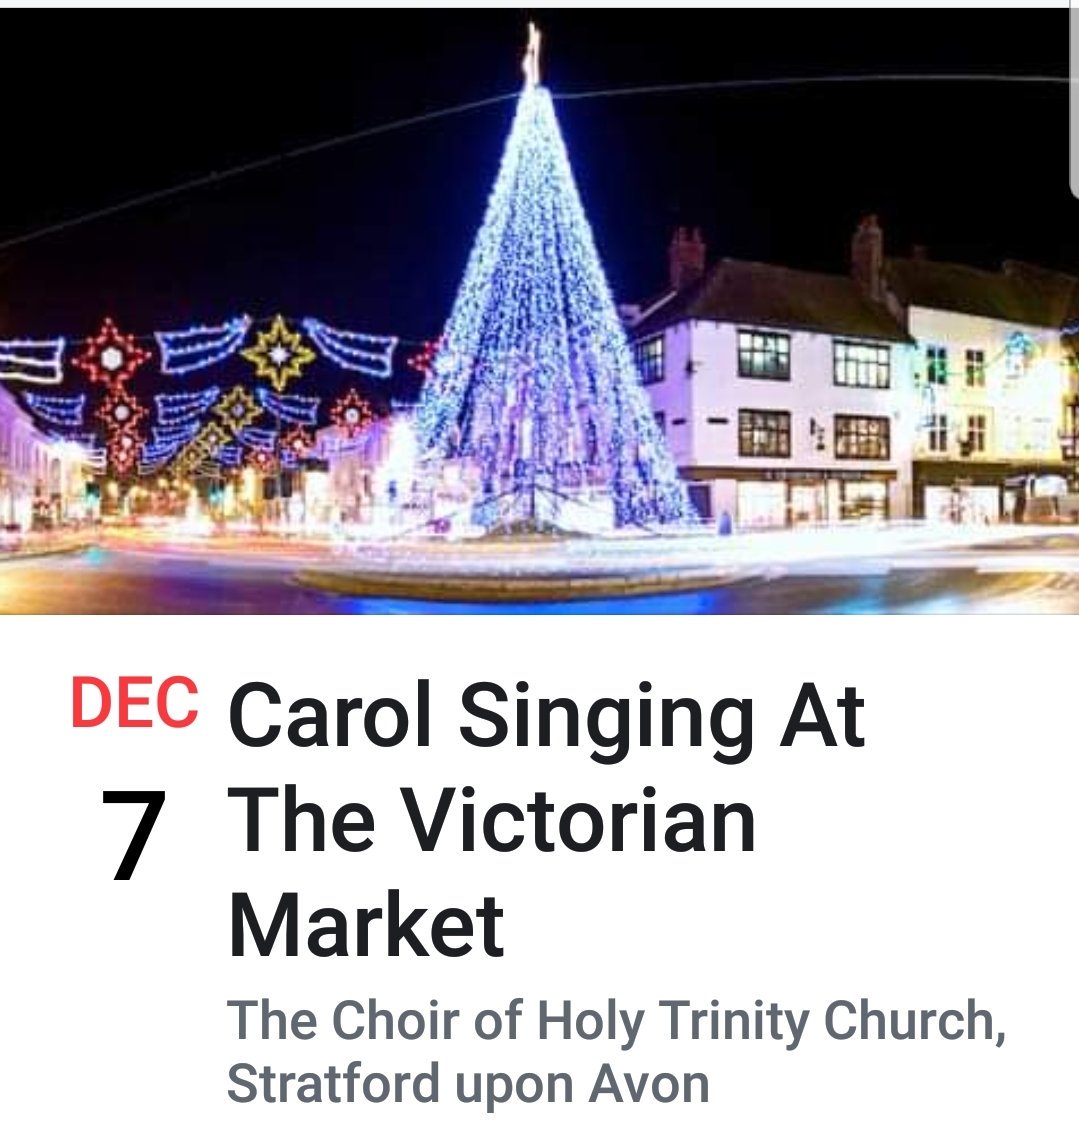 We're looking forward to this evening,come and enjoy carols in our beautiful hometown of #stratford upon avon, @HolyTrinitySonA @102TouchFM @tweet_stratford